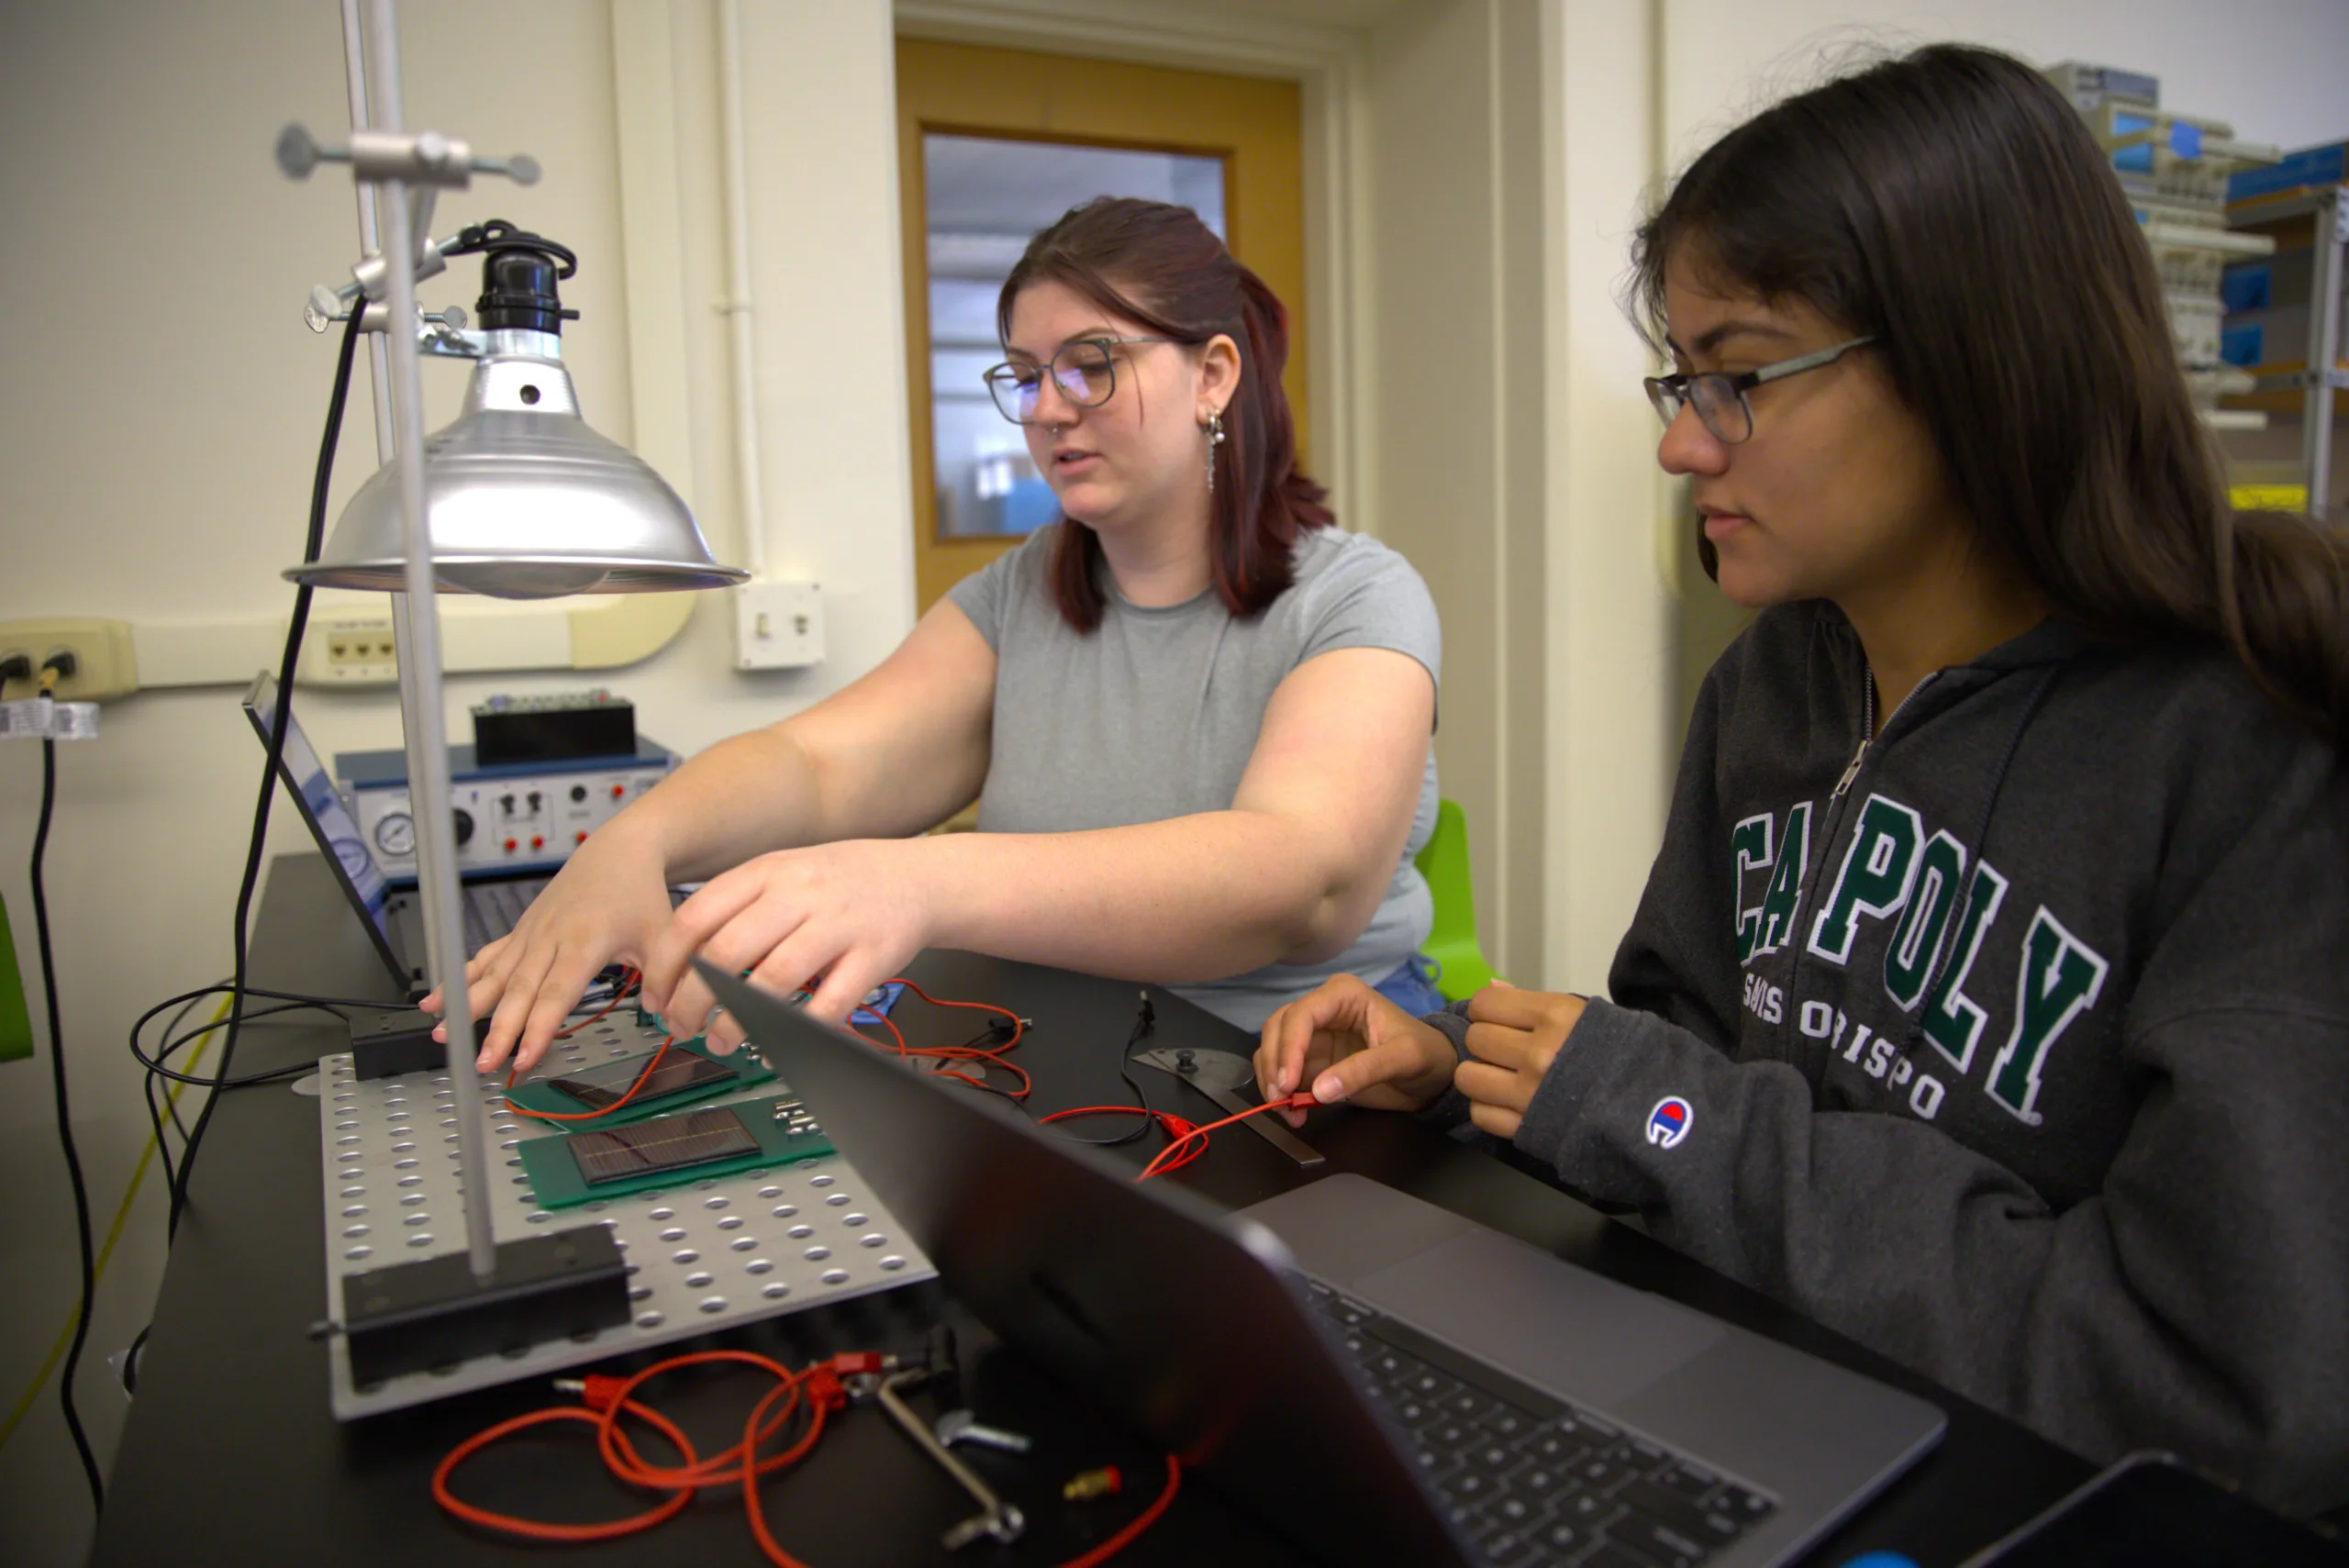 Two students work with laptops on a wiring project